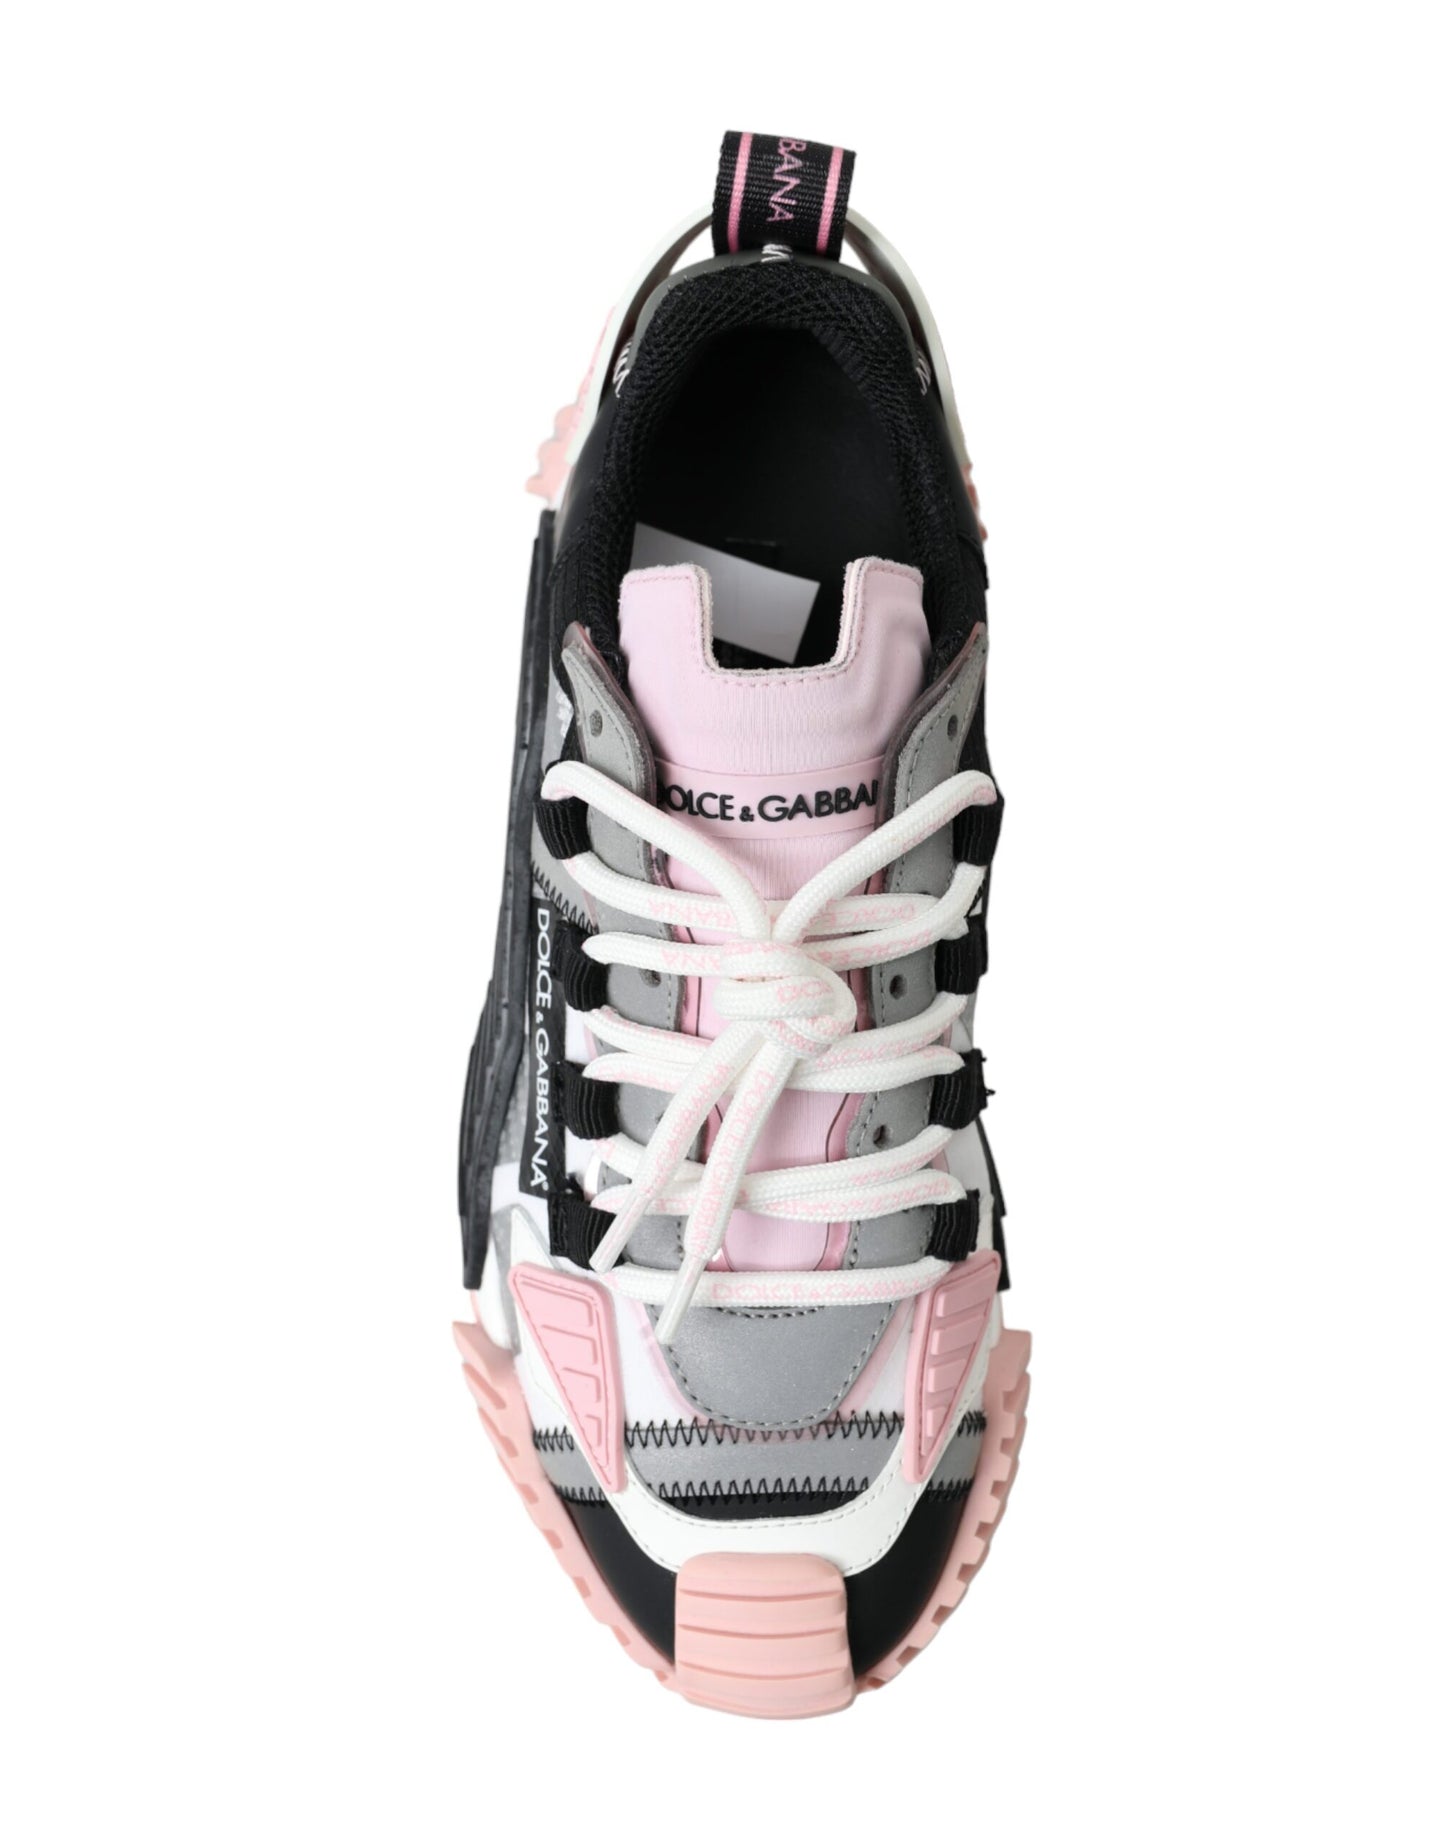 Dolce & Gabbana Multicolor Chic NS1 Lace-Up Sneakers